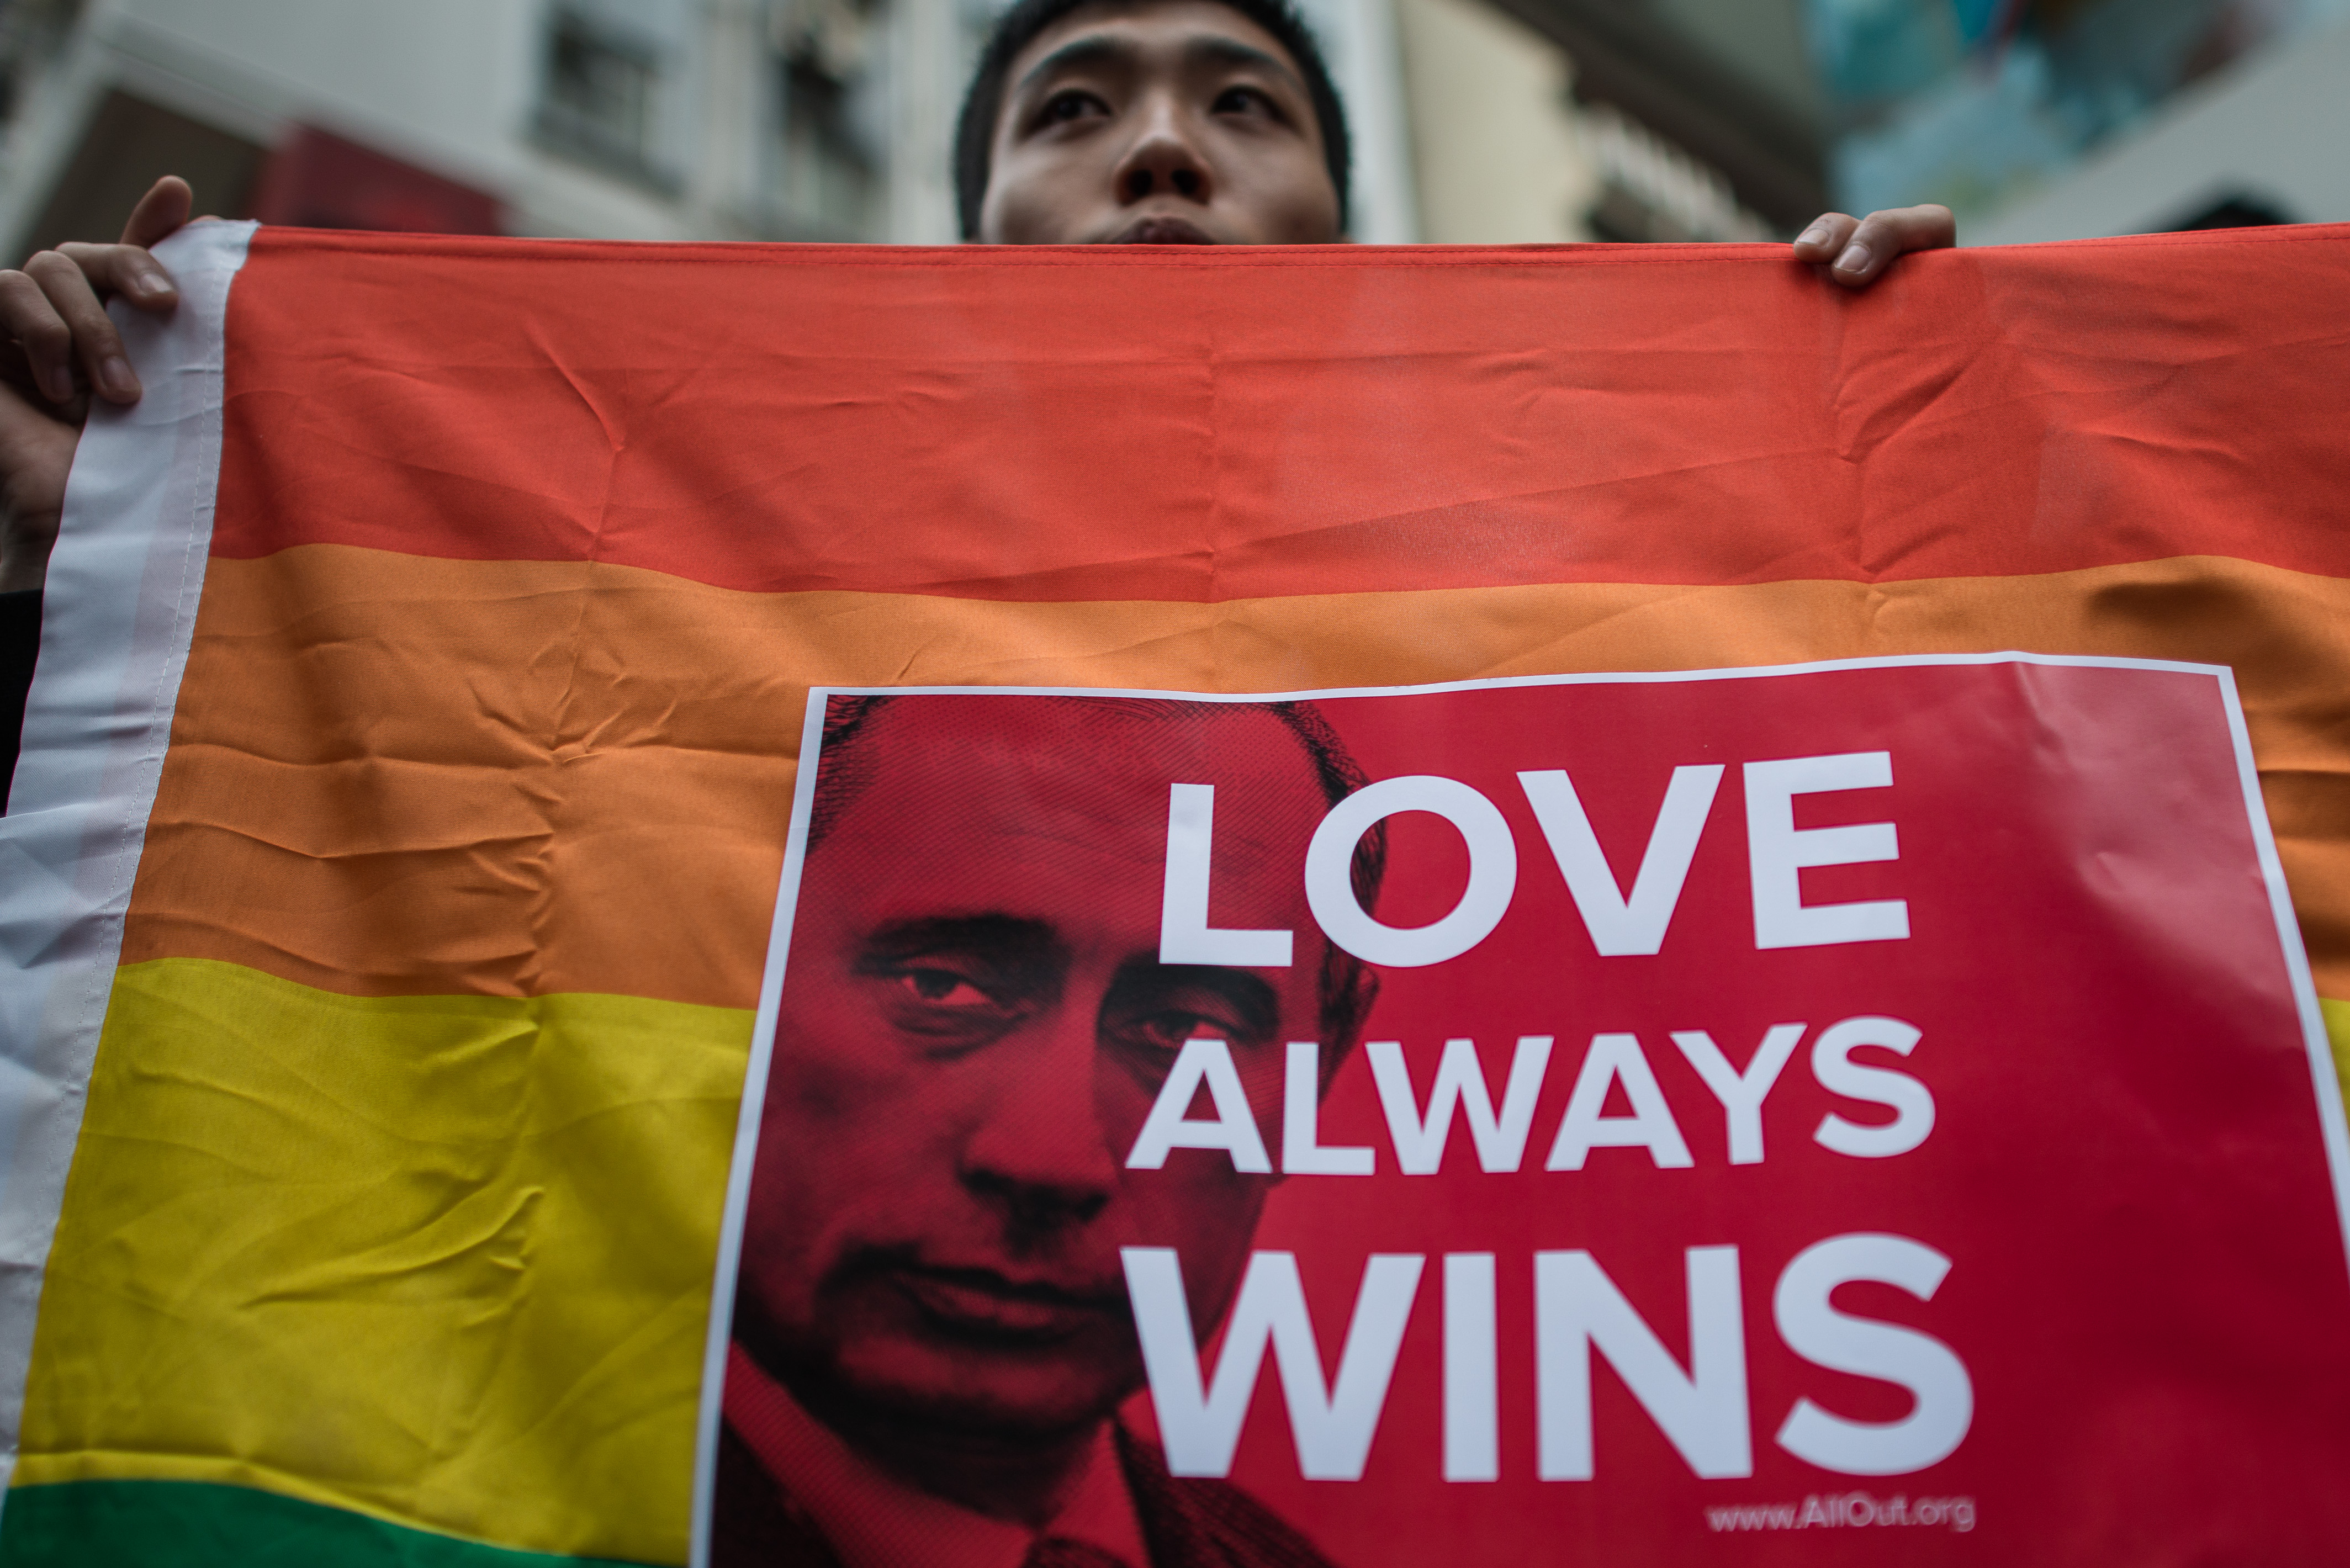 Reports Gay Rights Activist Detained At Sochi Olympics